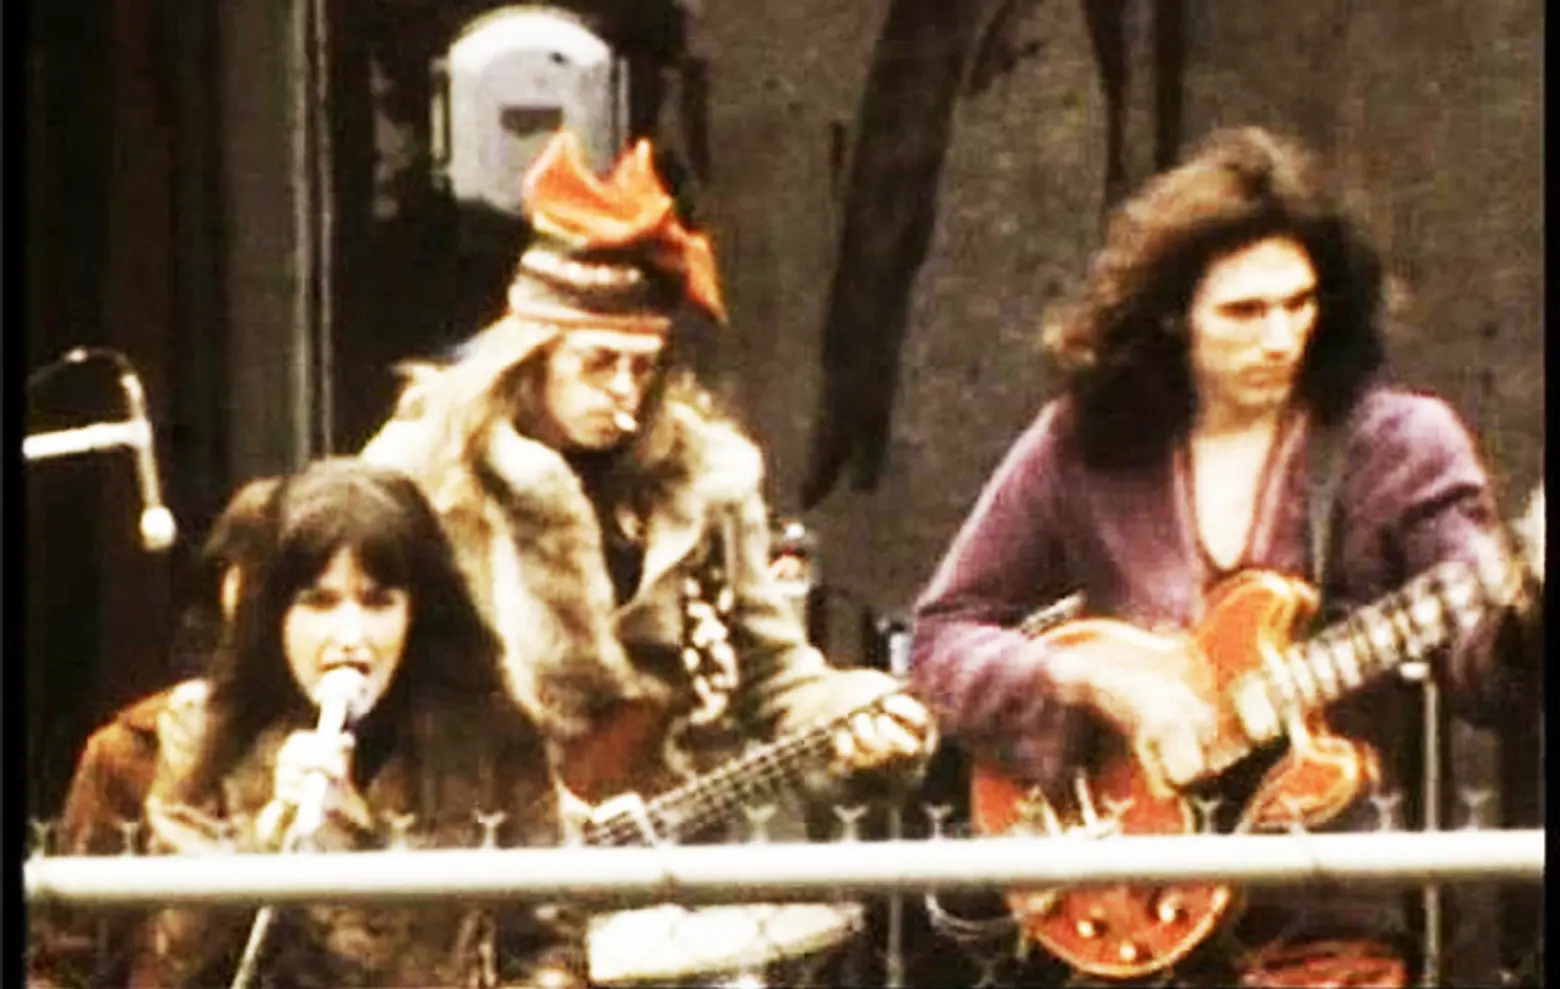 VIDEO: Illegal ’60s Rooftop Concert in Midtown Shows the People and Architecture of Another NYC